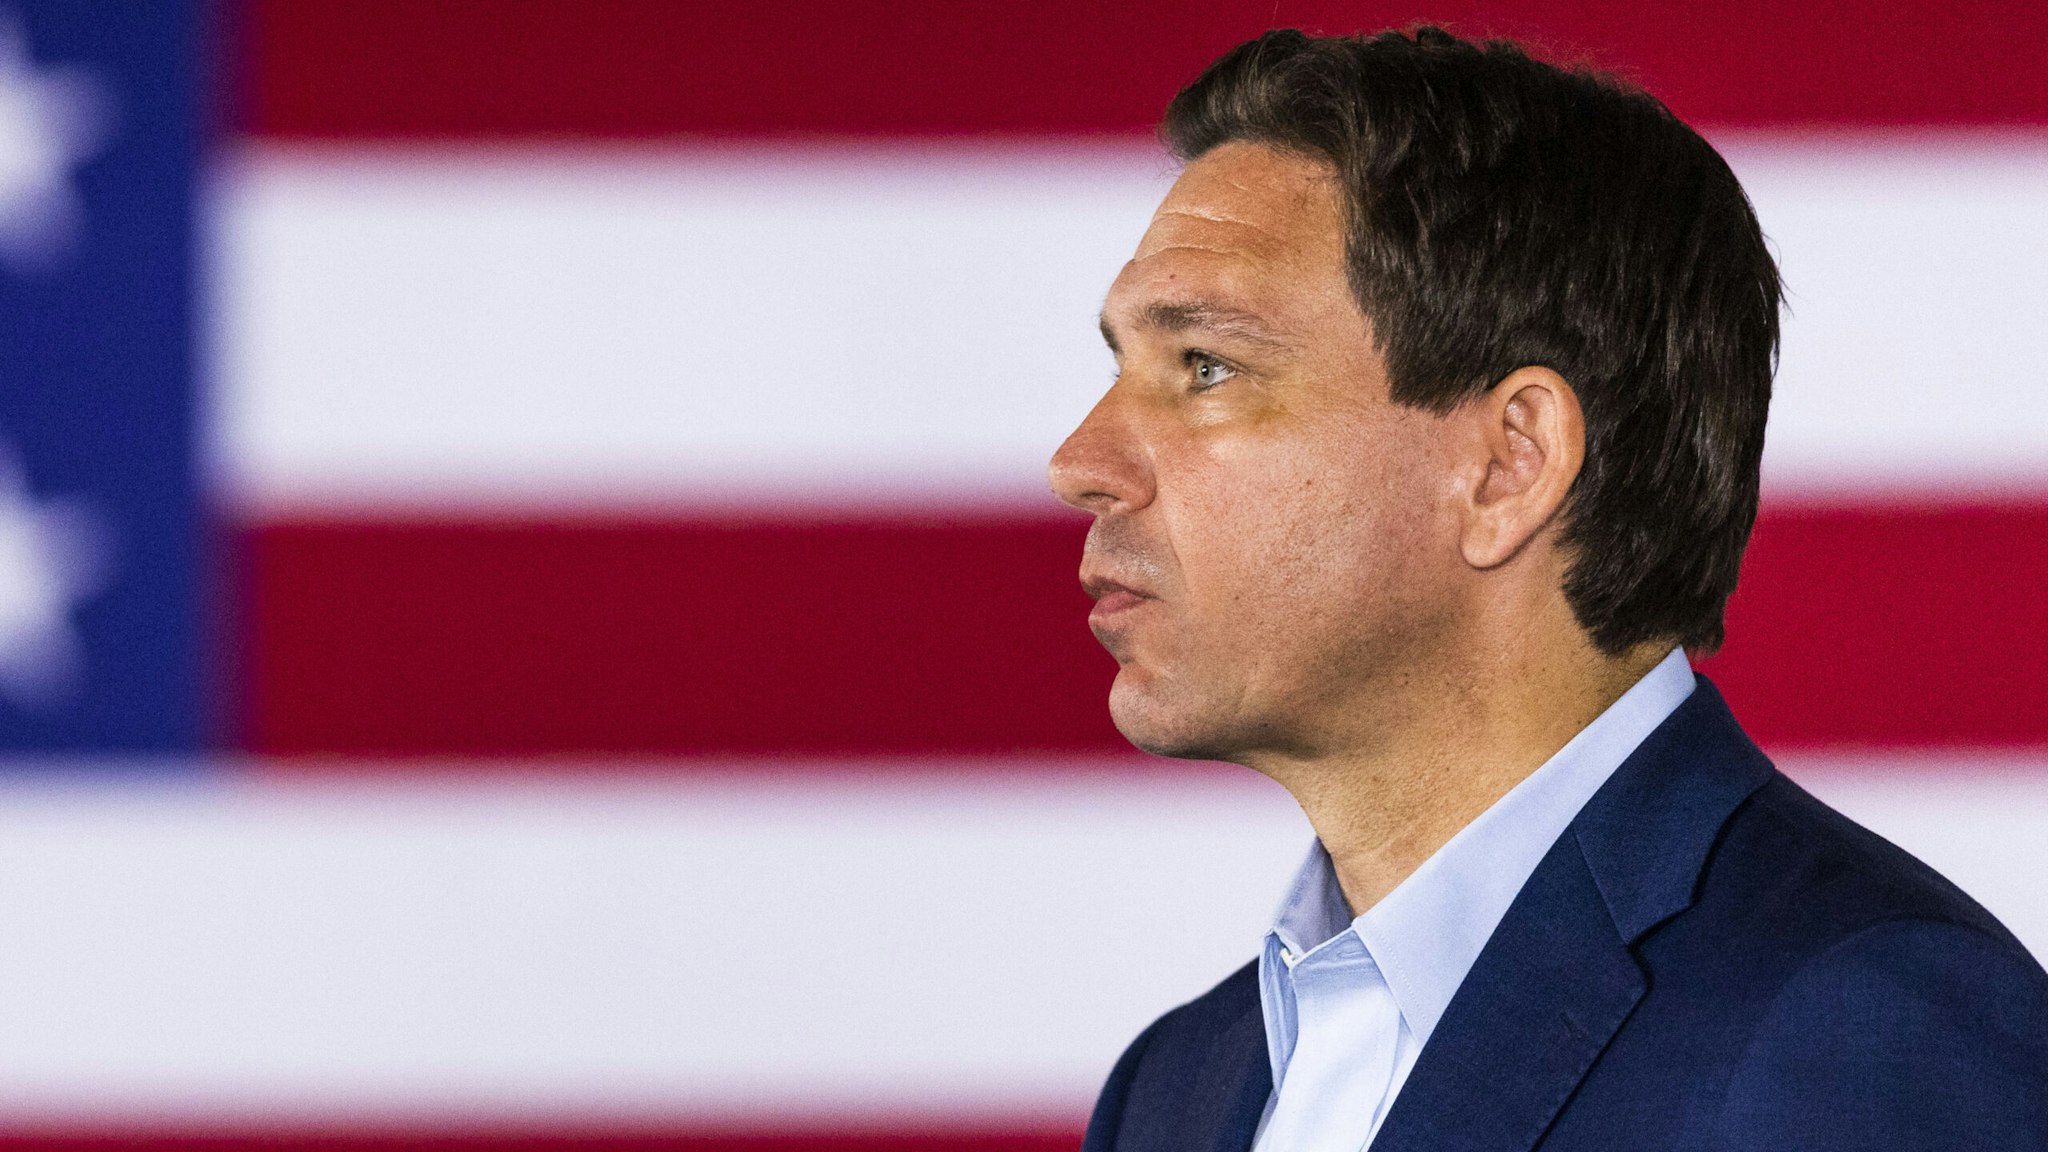 Republican presidential candidate Florida Governor Ron DeSantis speaks during a town hall event at the Alpine Grove Banquet Facility in Hollis, NH on June 27, 2023.